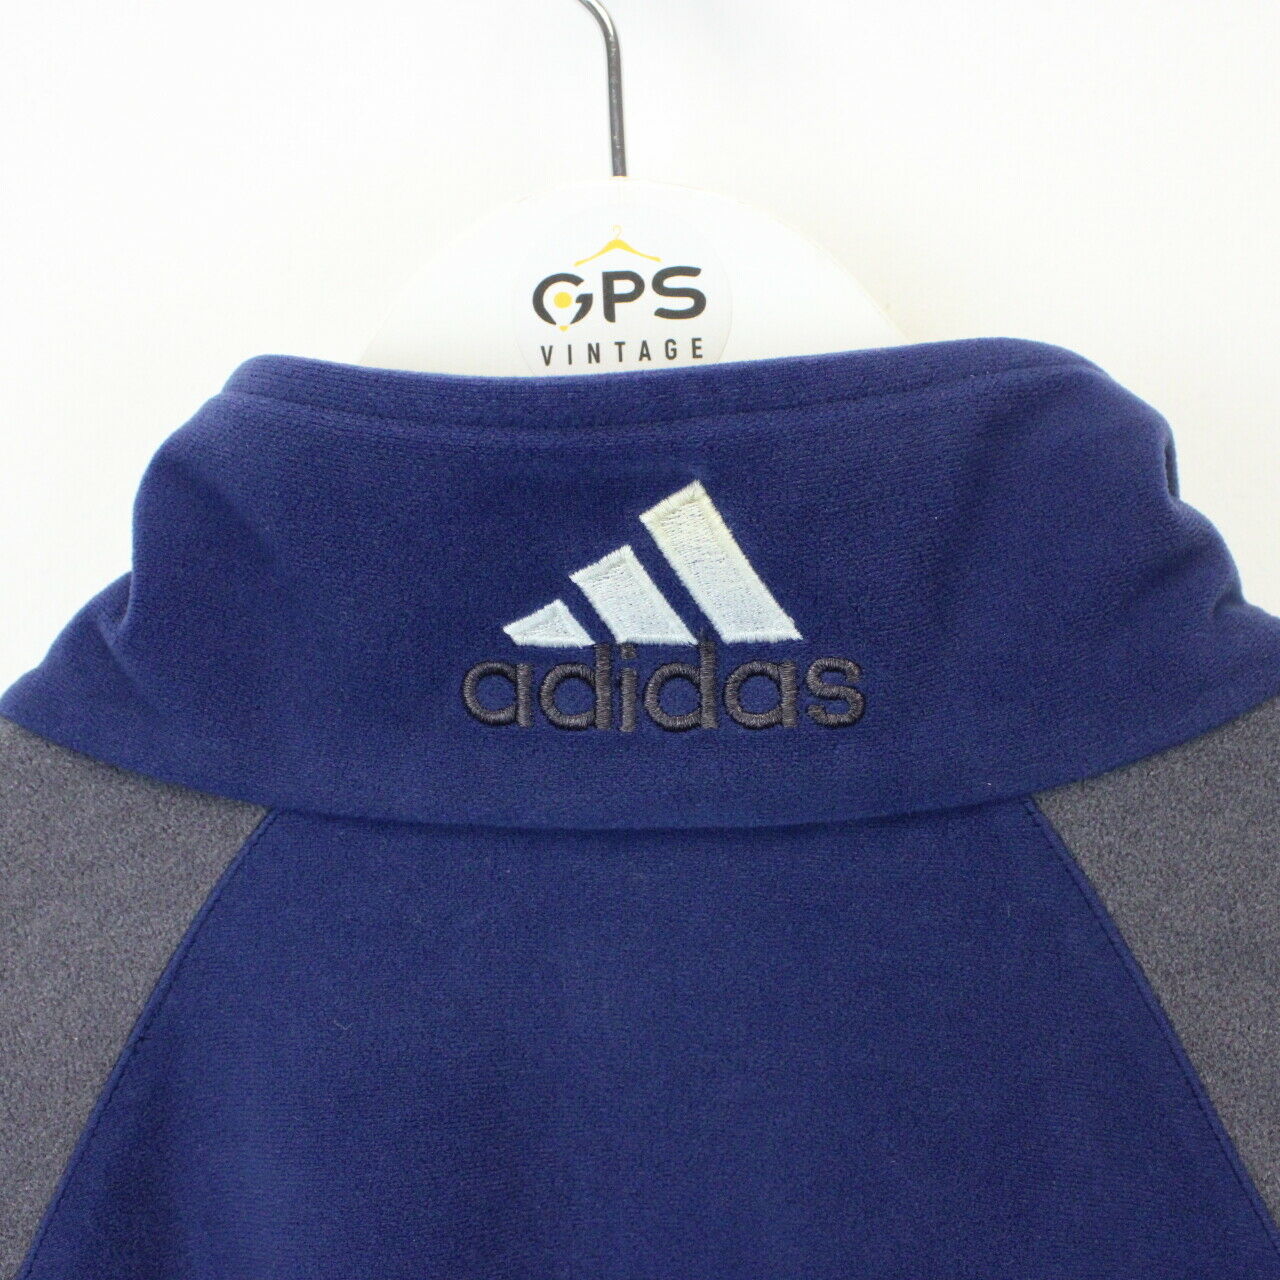 ADIDAS 90s Track Top Navy Blue | Large